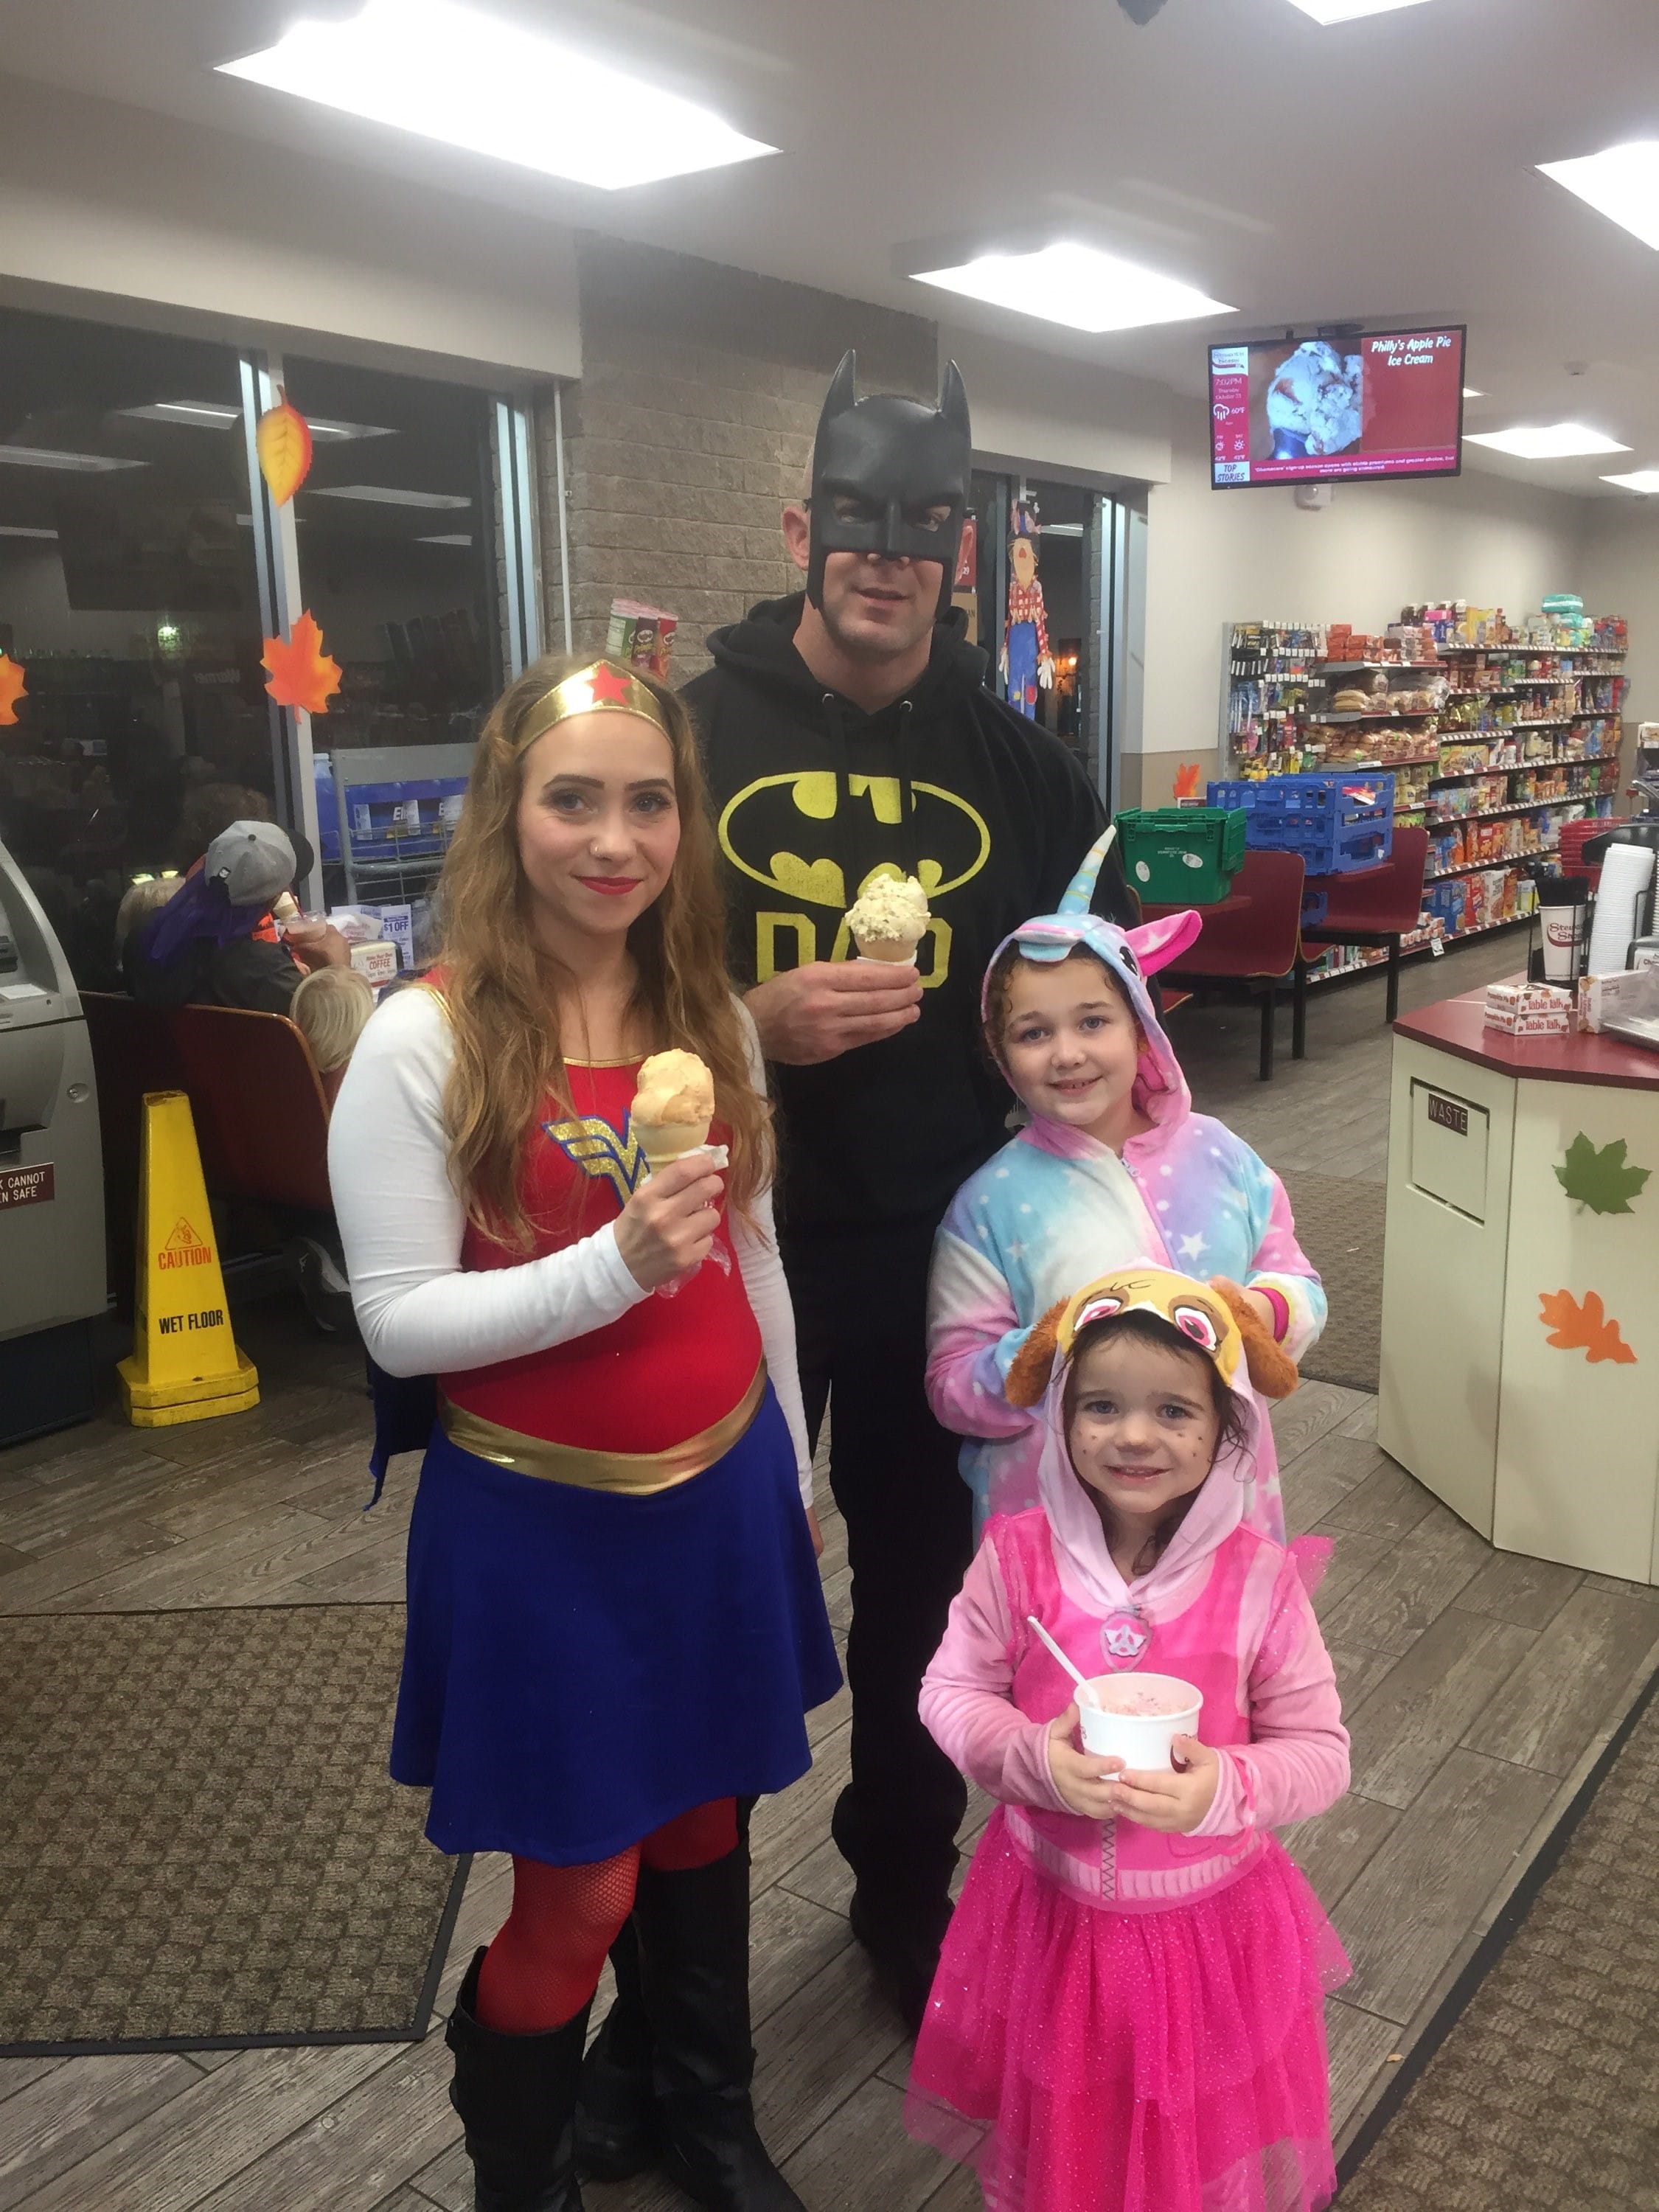 Family dressed up getting ice cream